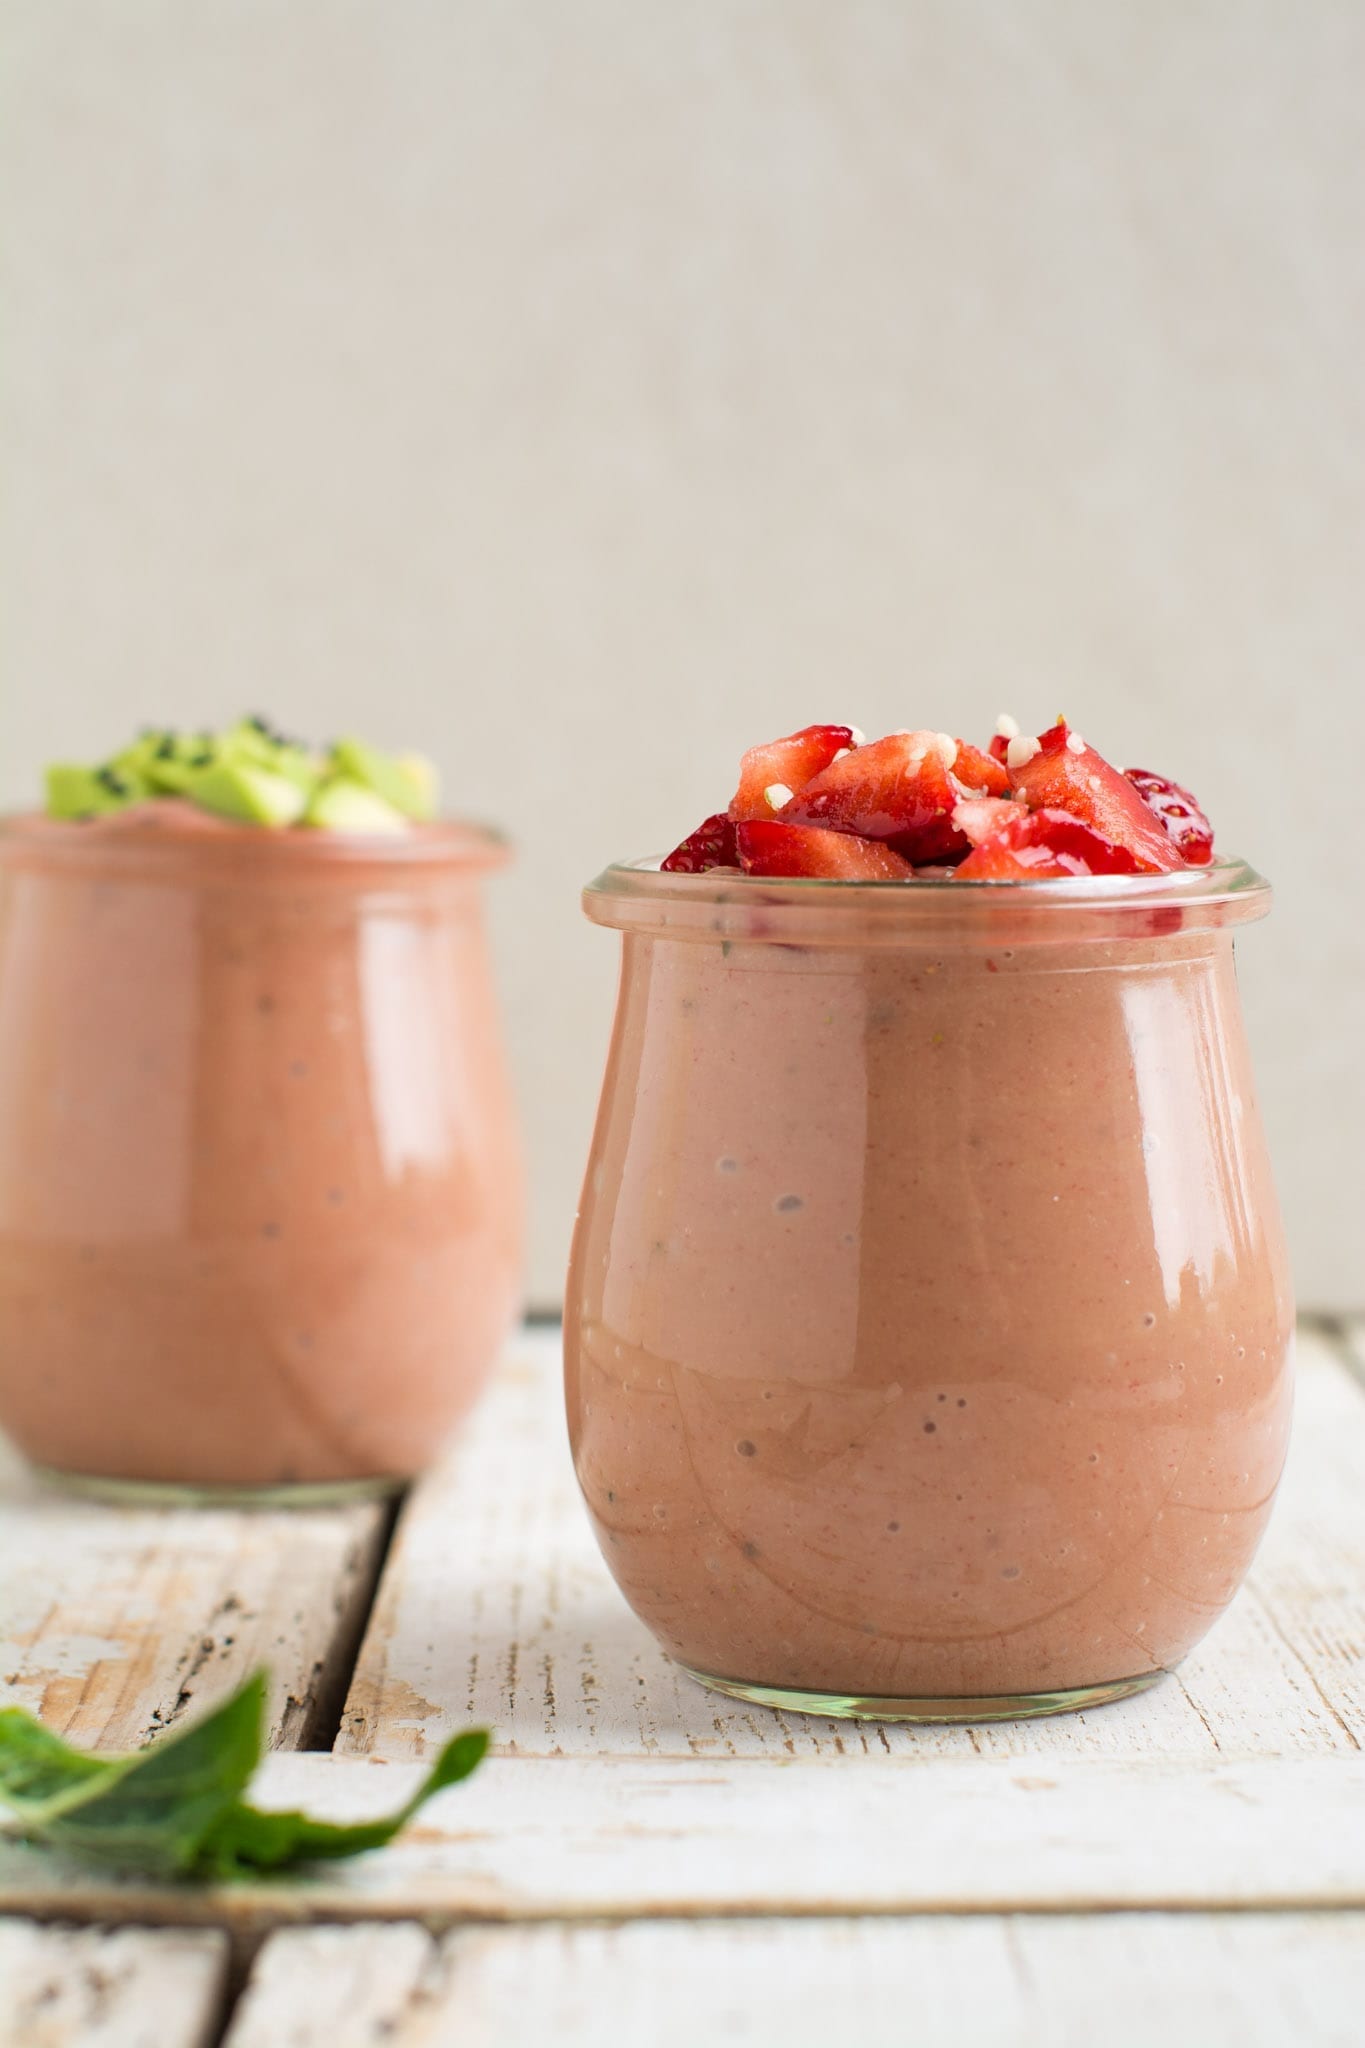 Silky strawberry avocado smoothie with no added sugar that is ready in 5 minutes and tastes darn delicious. 